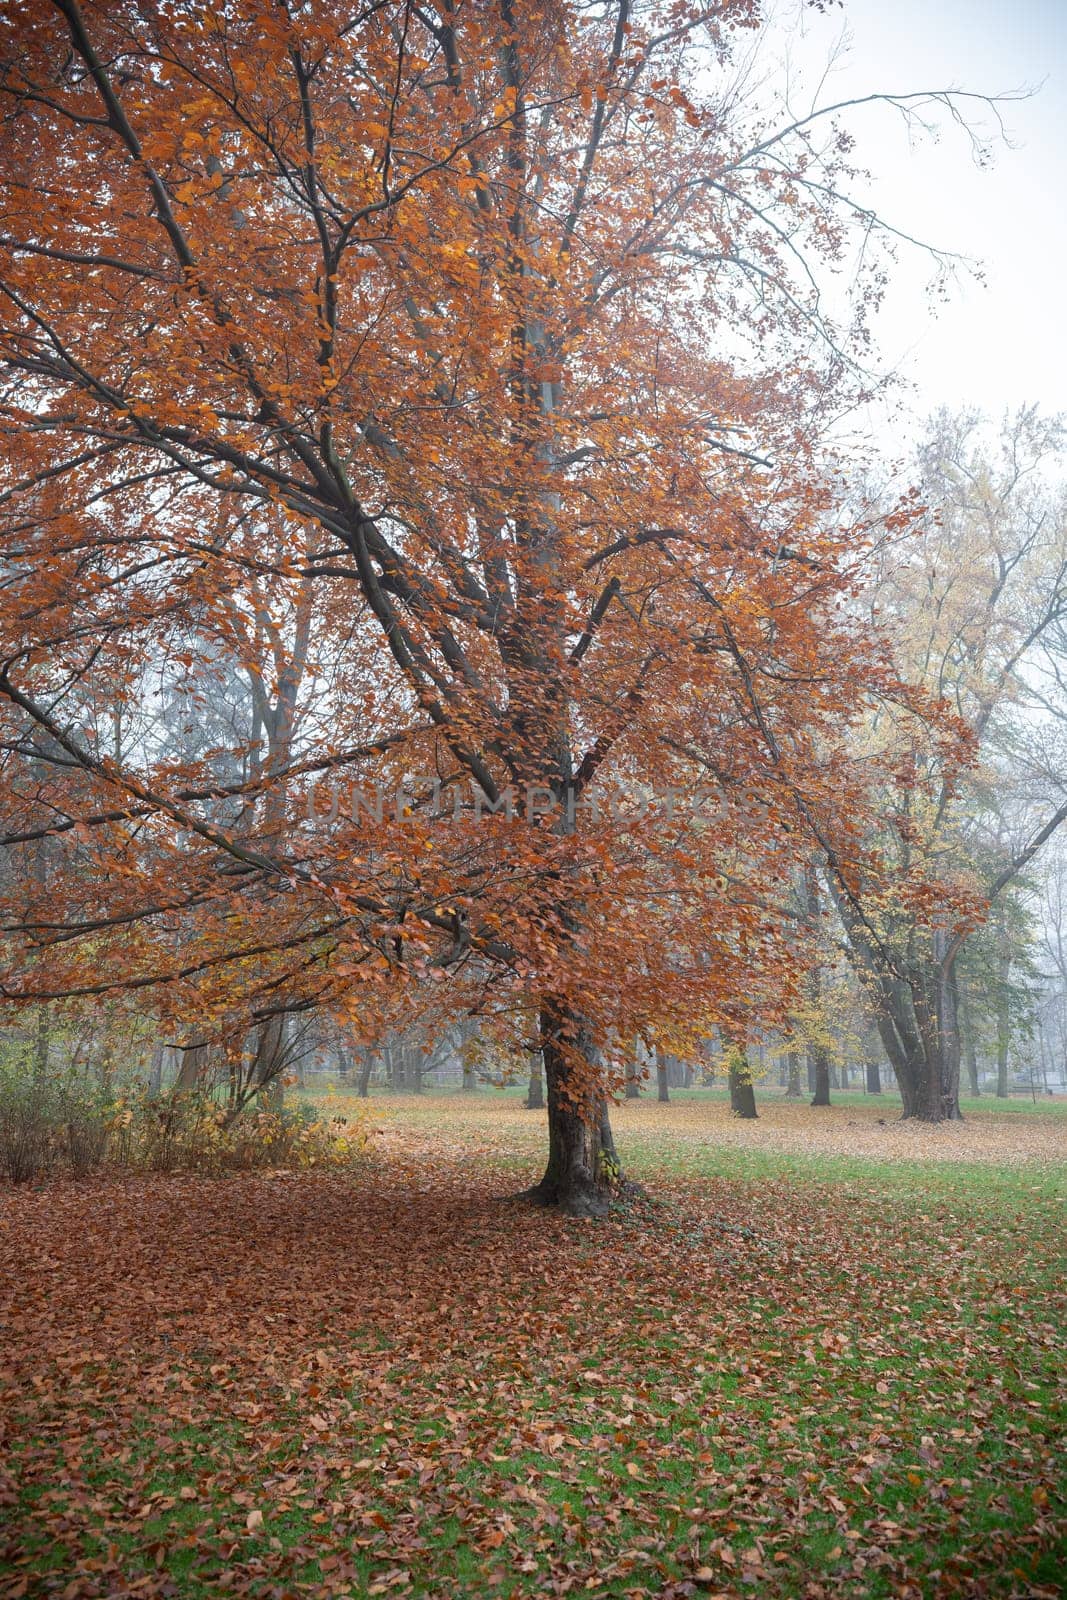 A beautiful autumn display, with the ground covered in a blanket of colorful leaves.